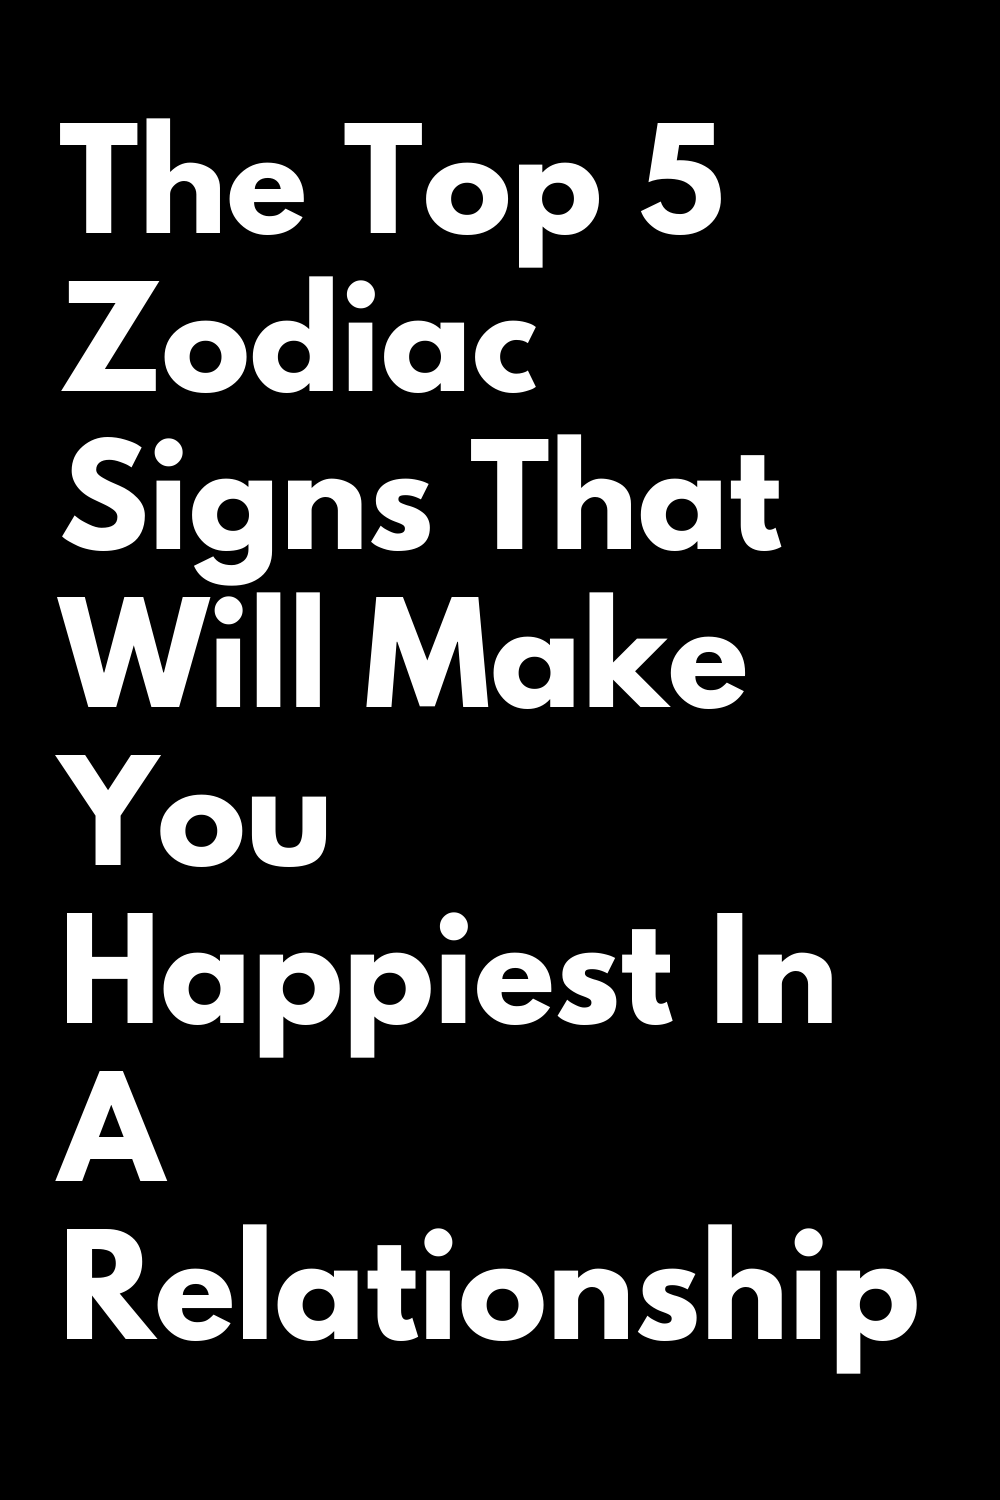 The Top 5 Zodiac Signs That Will Make You Happiest In A Relationship ...